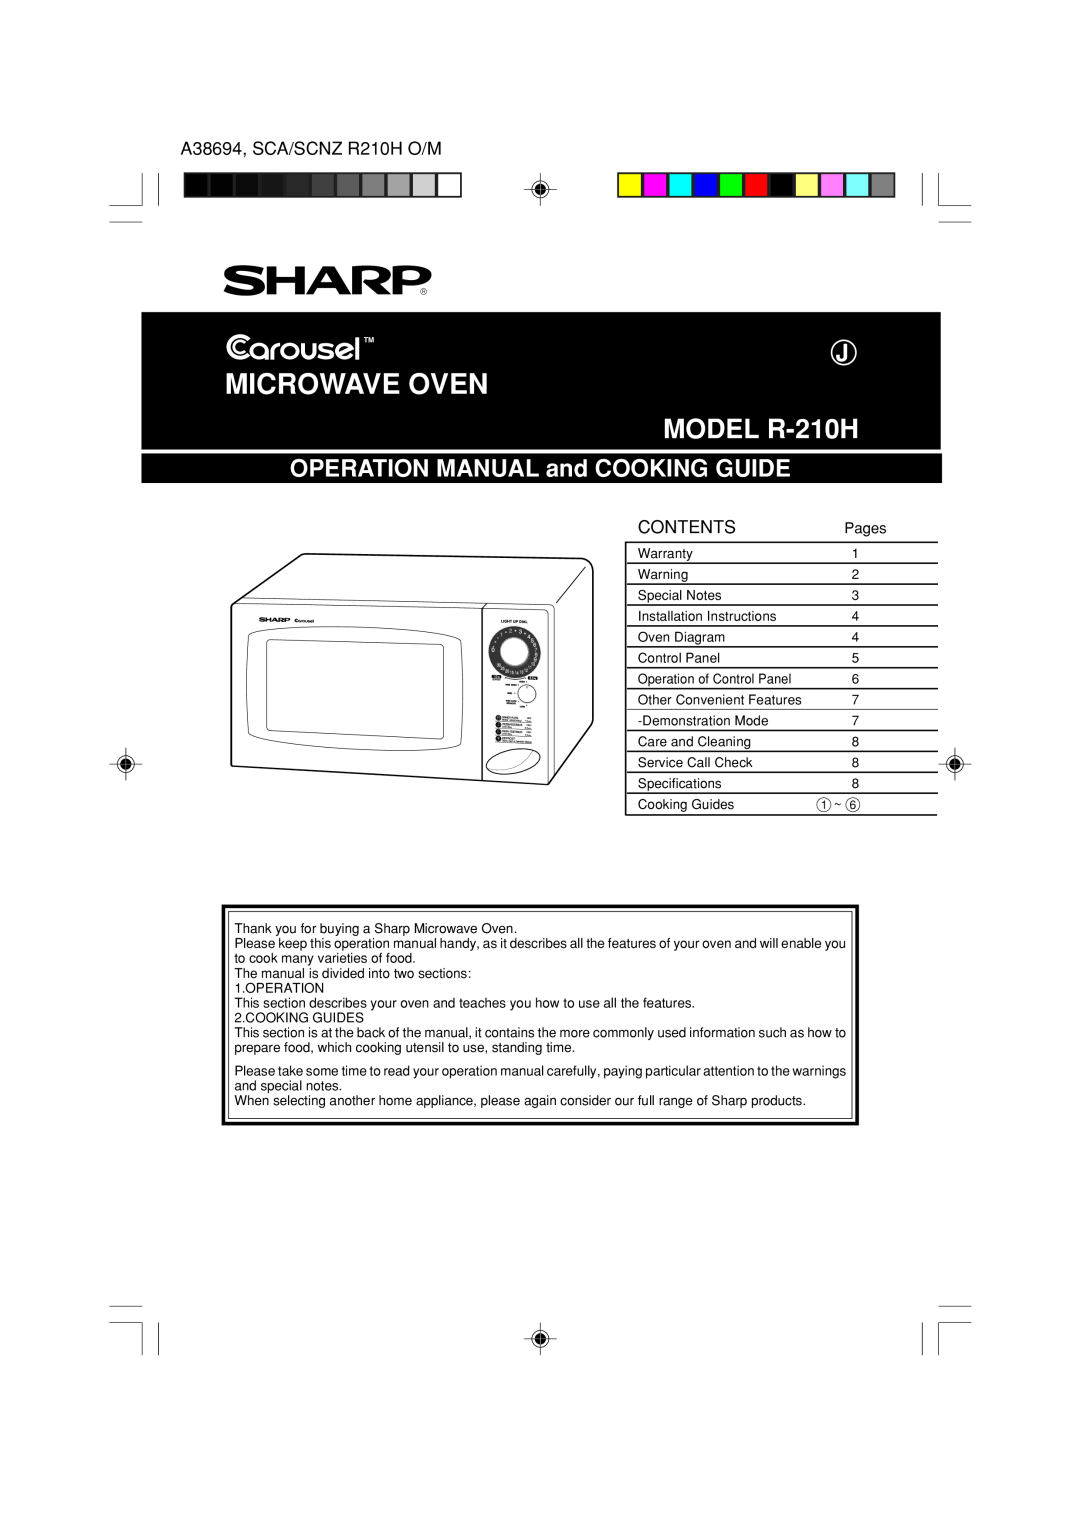 Sharp operation manual A38694, SCA/SCNZ R210H O/M, Contents, Microwave Oven, MODEL R-210H, Pages 